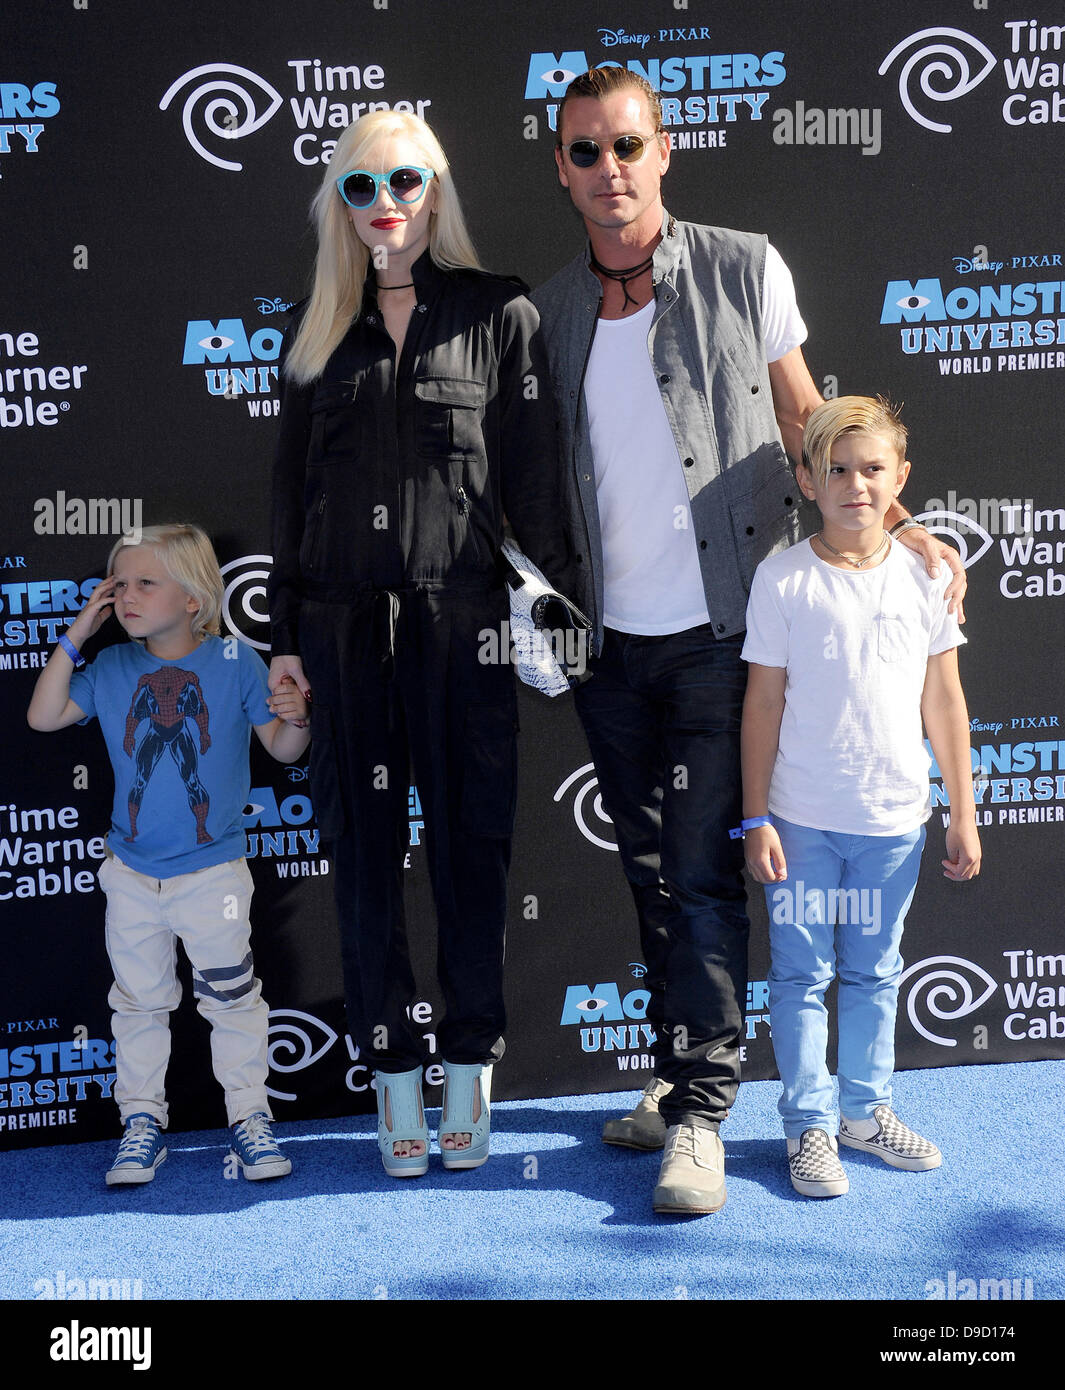 Hollywood, USA. 17th June, 2013. Gwen Stefani, Gavin Rossdale, Kingston and Zuma arrives for the premiere of the film 'Monsters University' at the El Capitan theater. Credit:  ZUMA Press, Inc./Alamy Live News Stock Photo